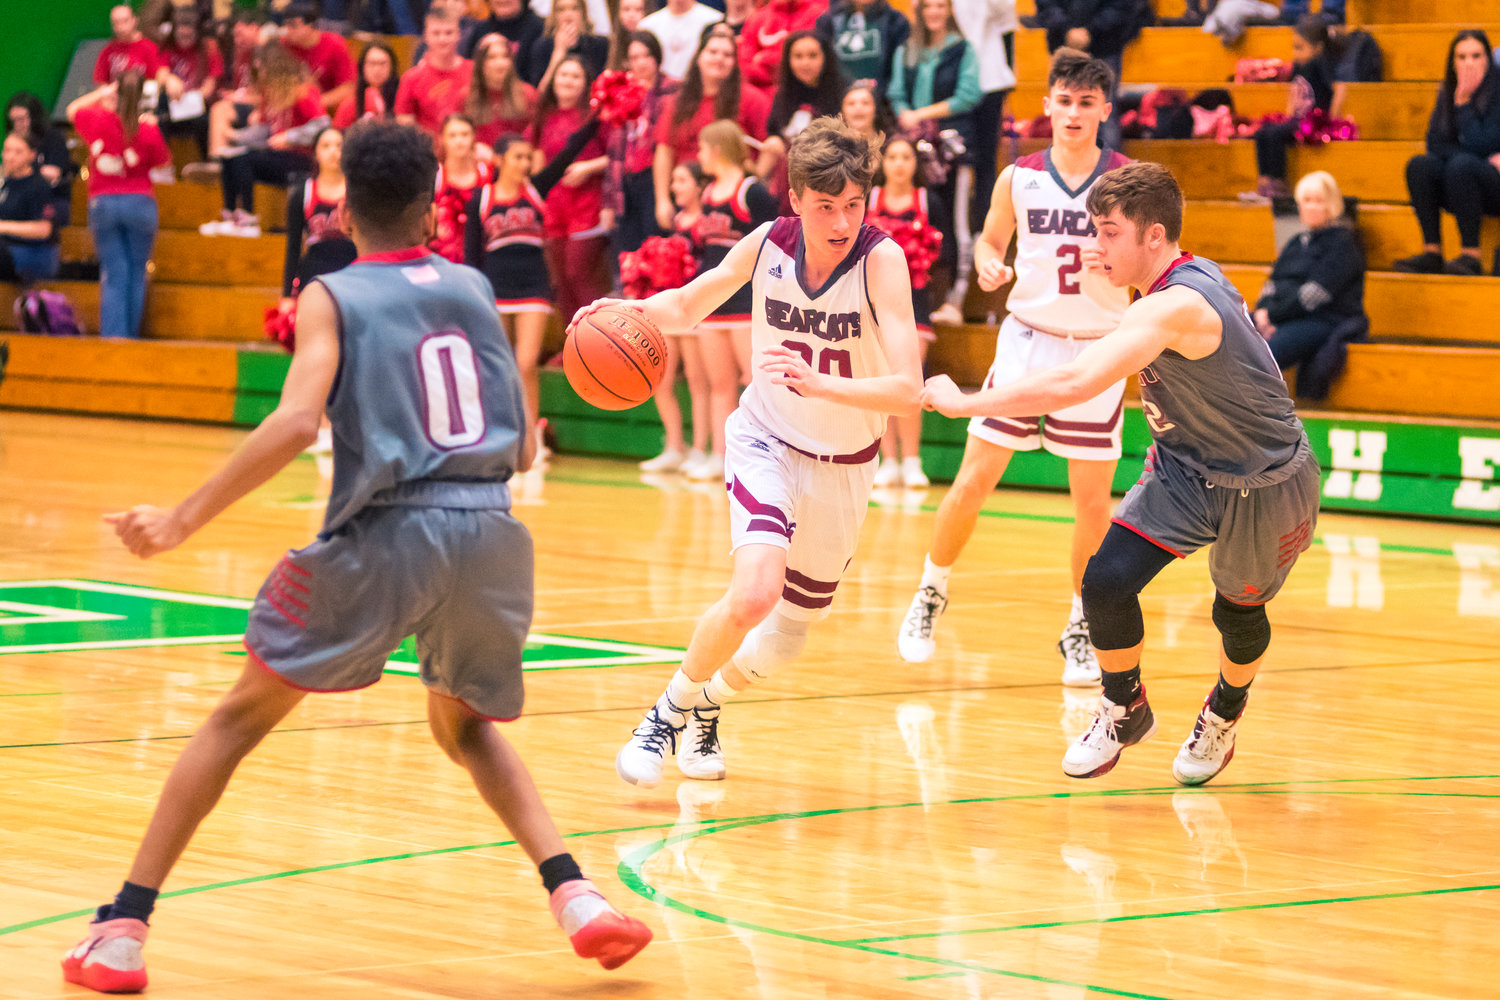 W.F. West's Tyler Speck (30) dribbles towards the hoop during a game against Jacks Thursday night at Tumwater High School.